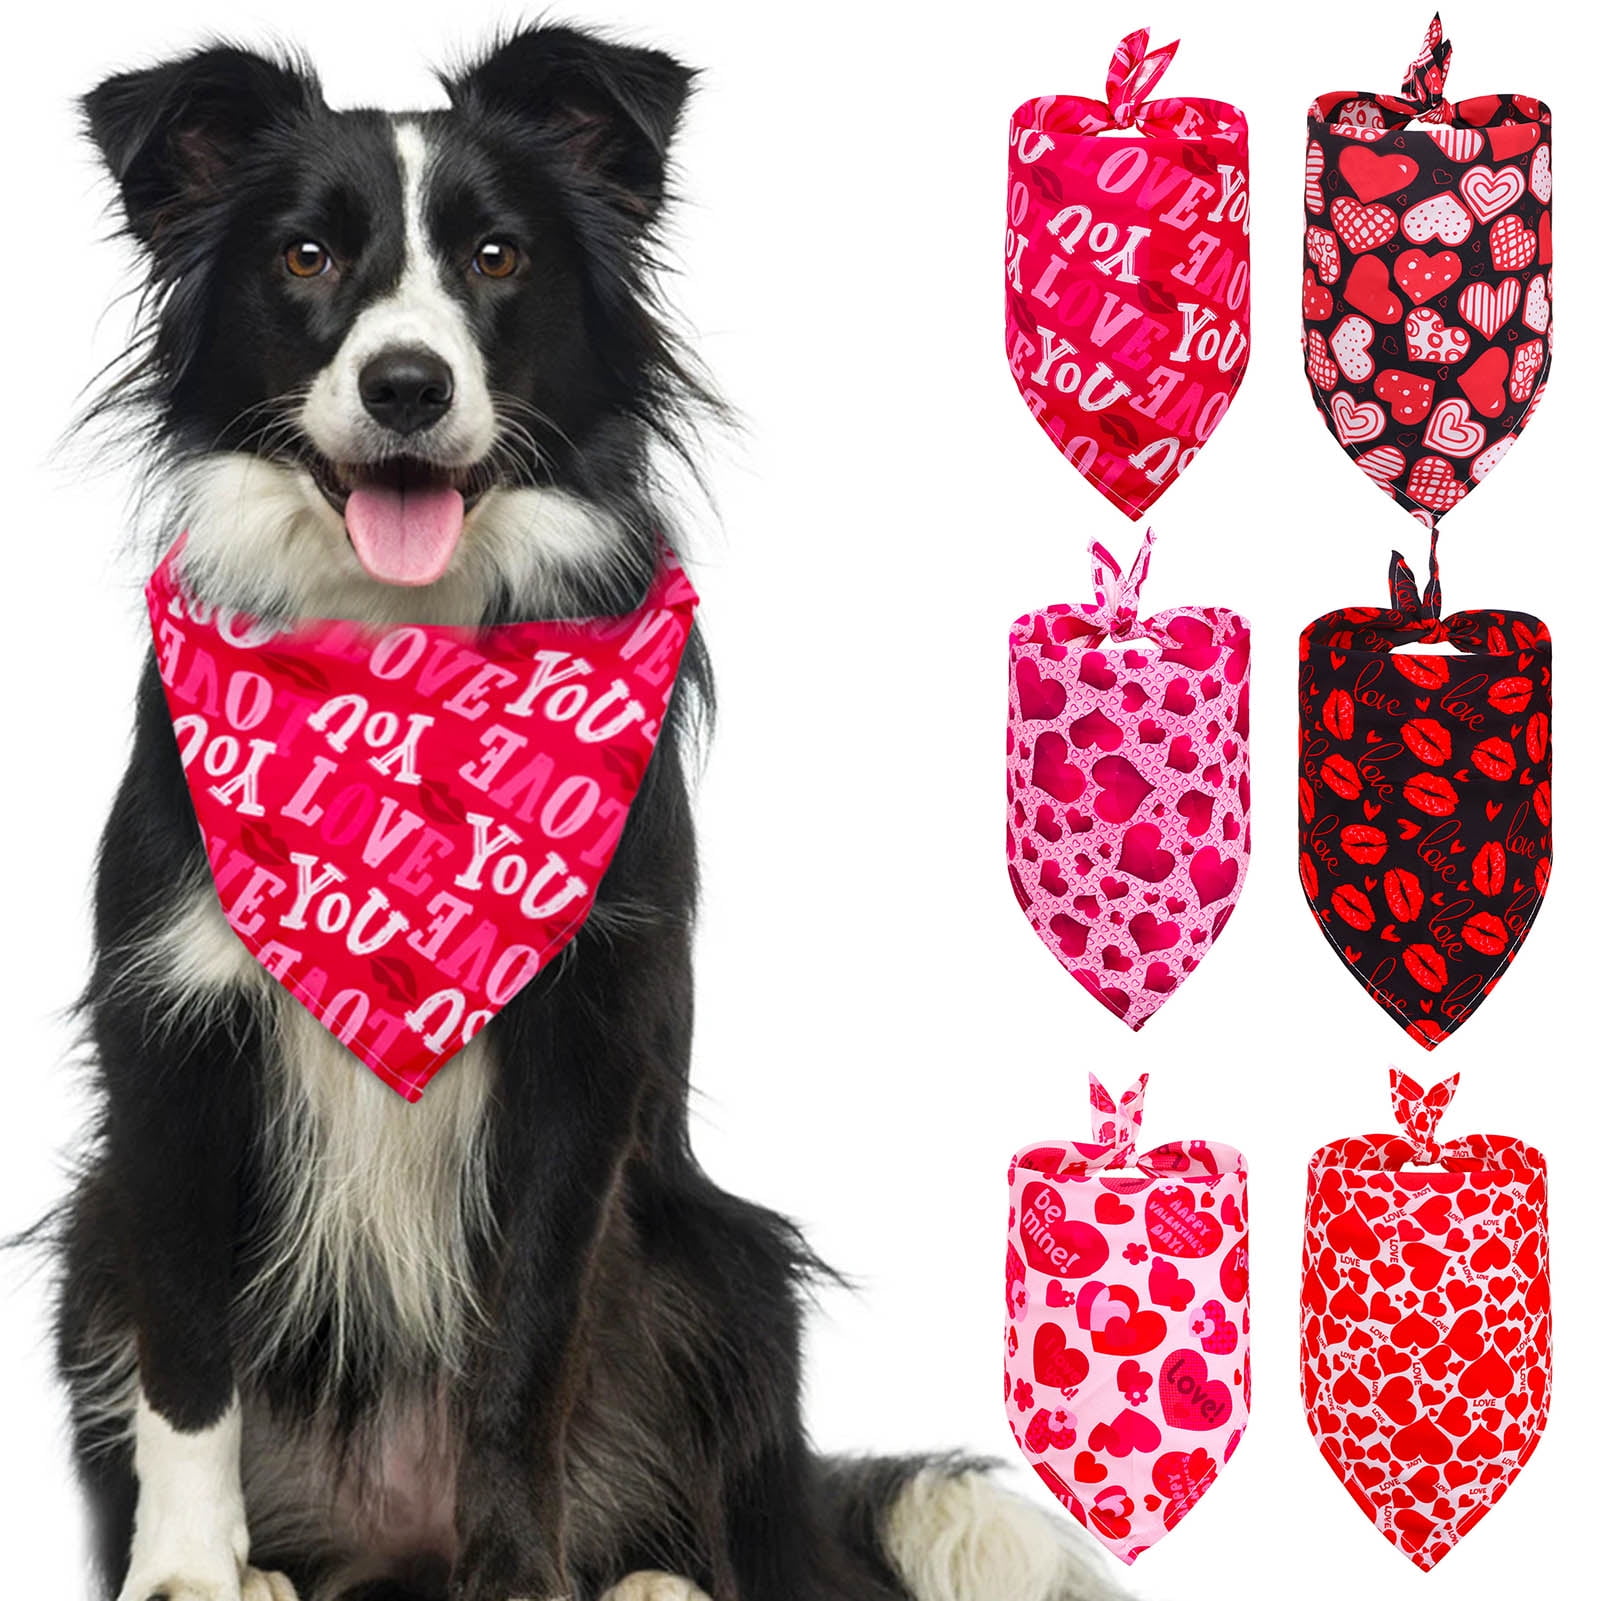 Yirtree Valentine's Day Dog Bandana Triangle Bib Scarf with Lip Heart and  Love Patterns Reversible Pet Neckerchief Accessories for Dogs Cats Pets